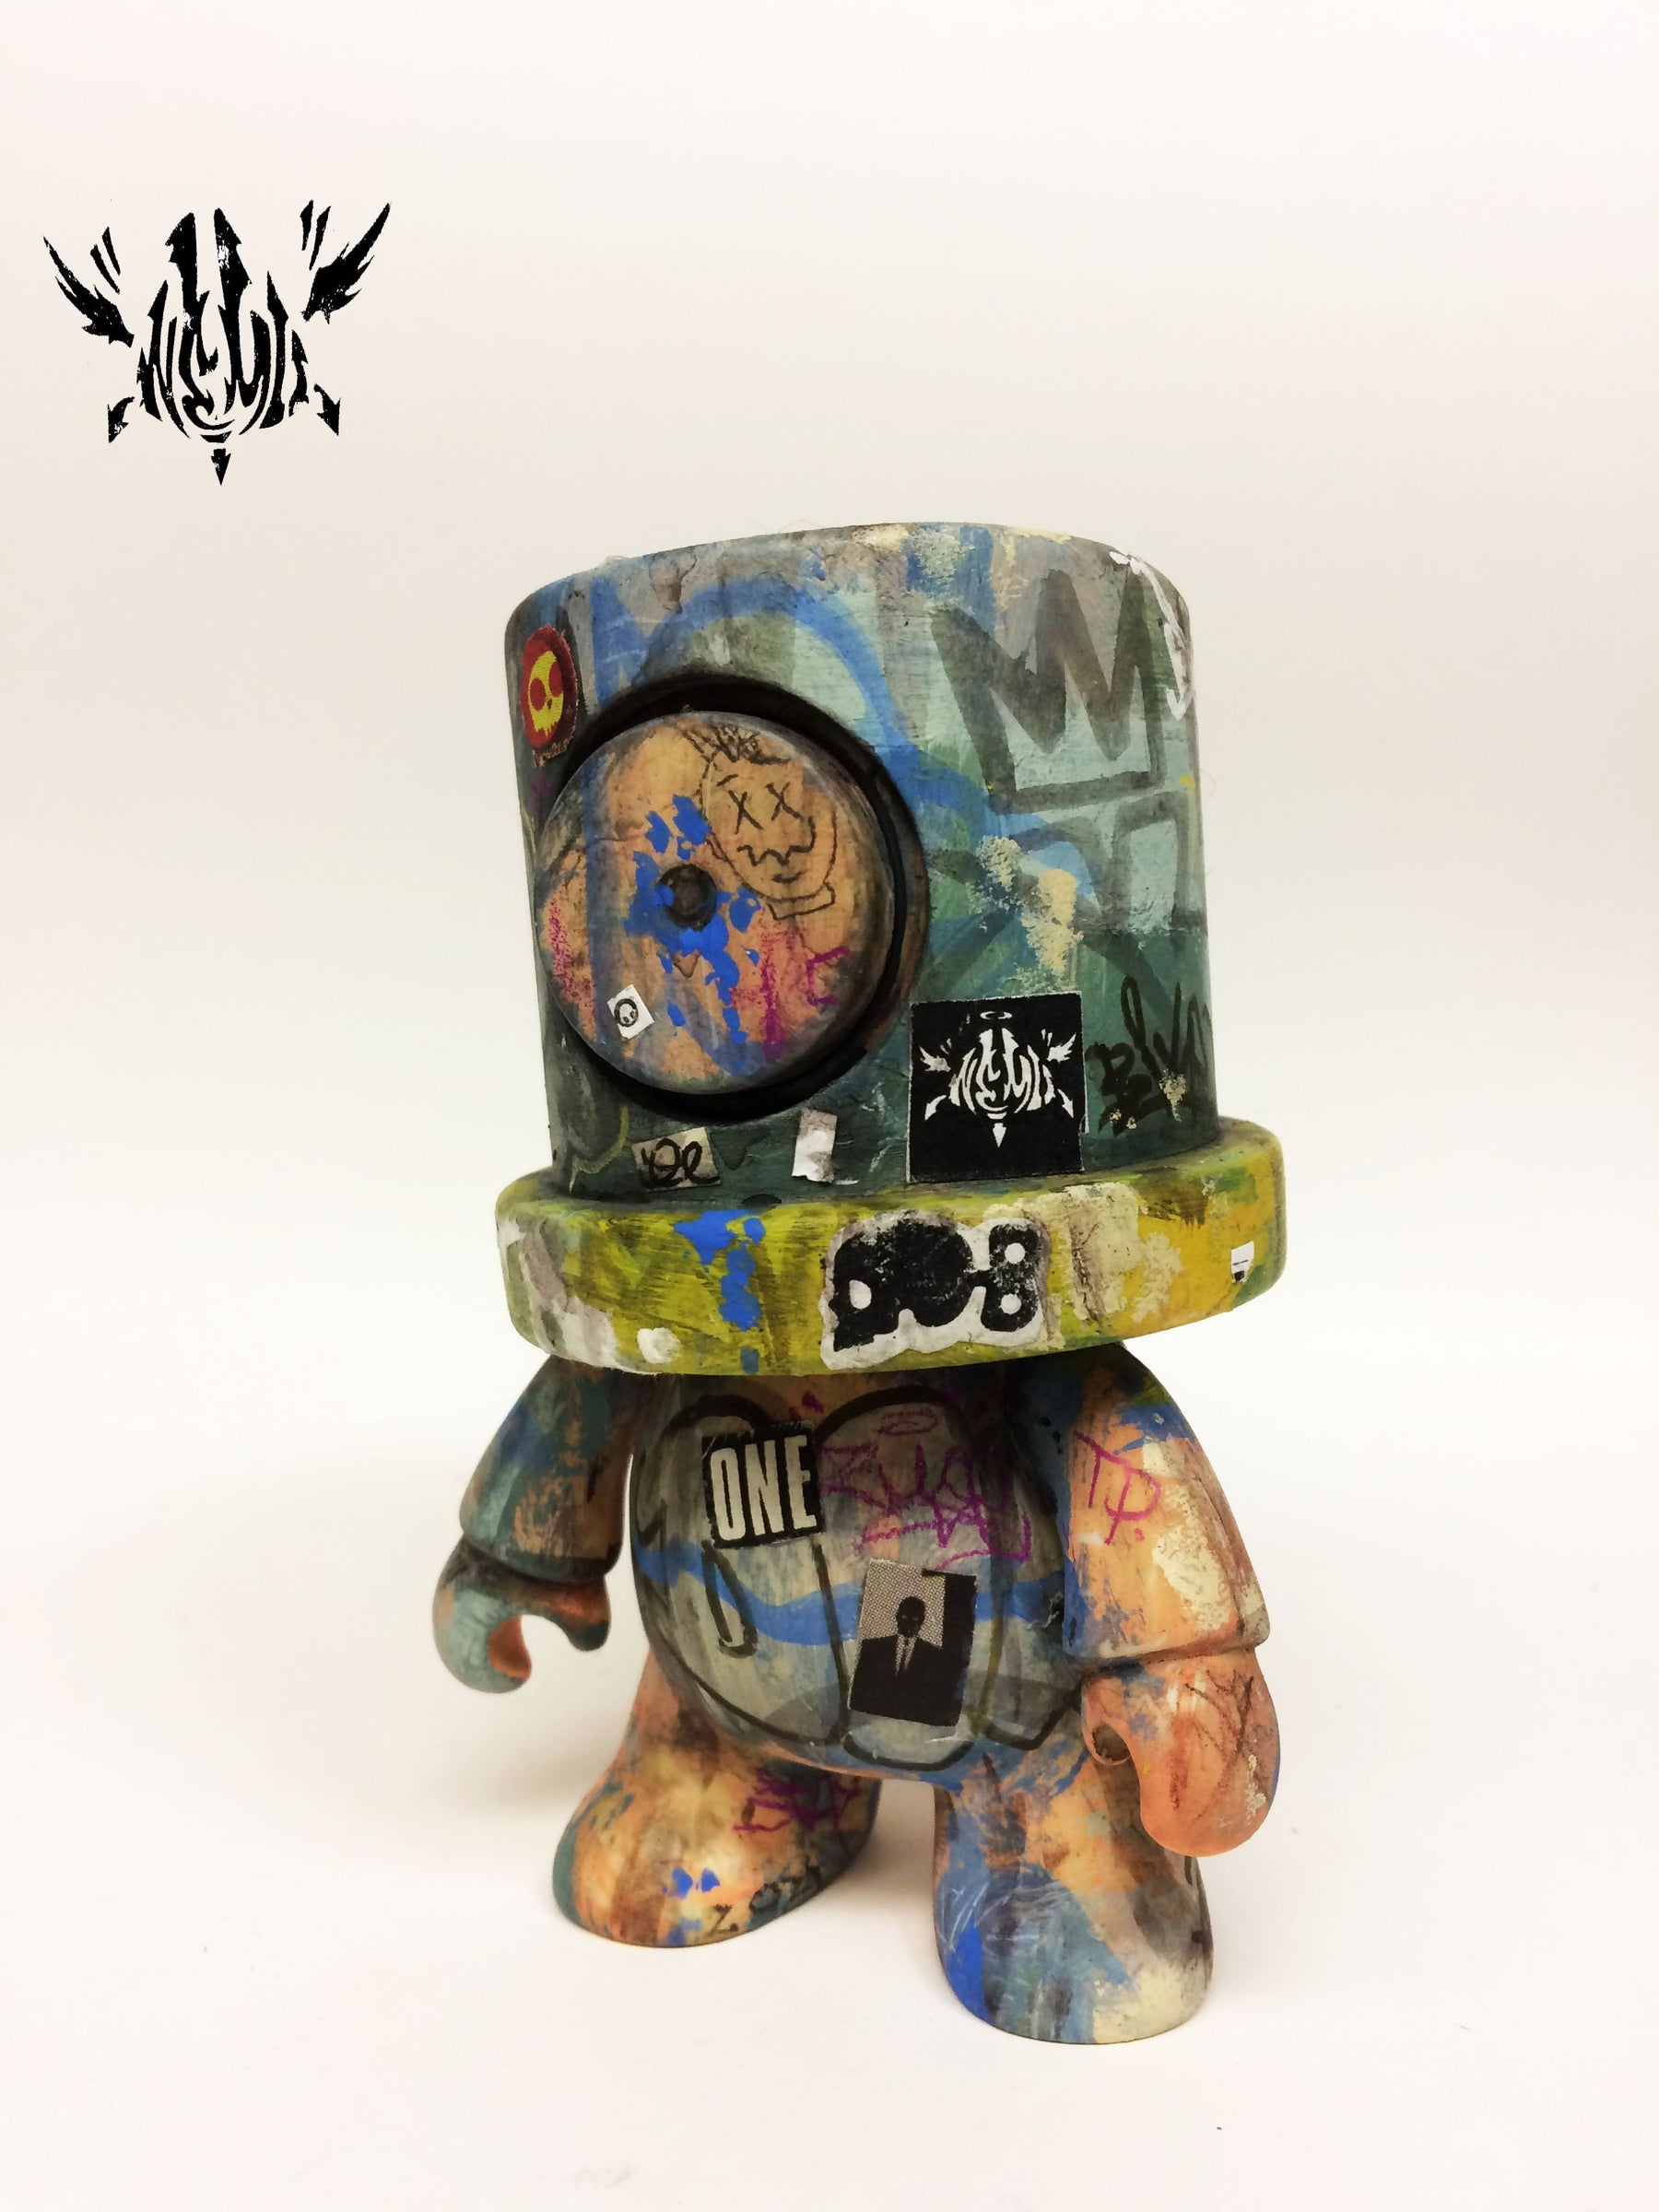 NEMO Old NY Style Mini Qee with Bombed Back Wall Available Now ! ! !